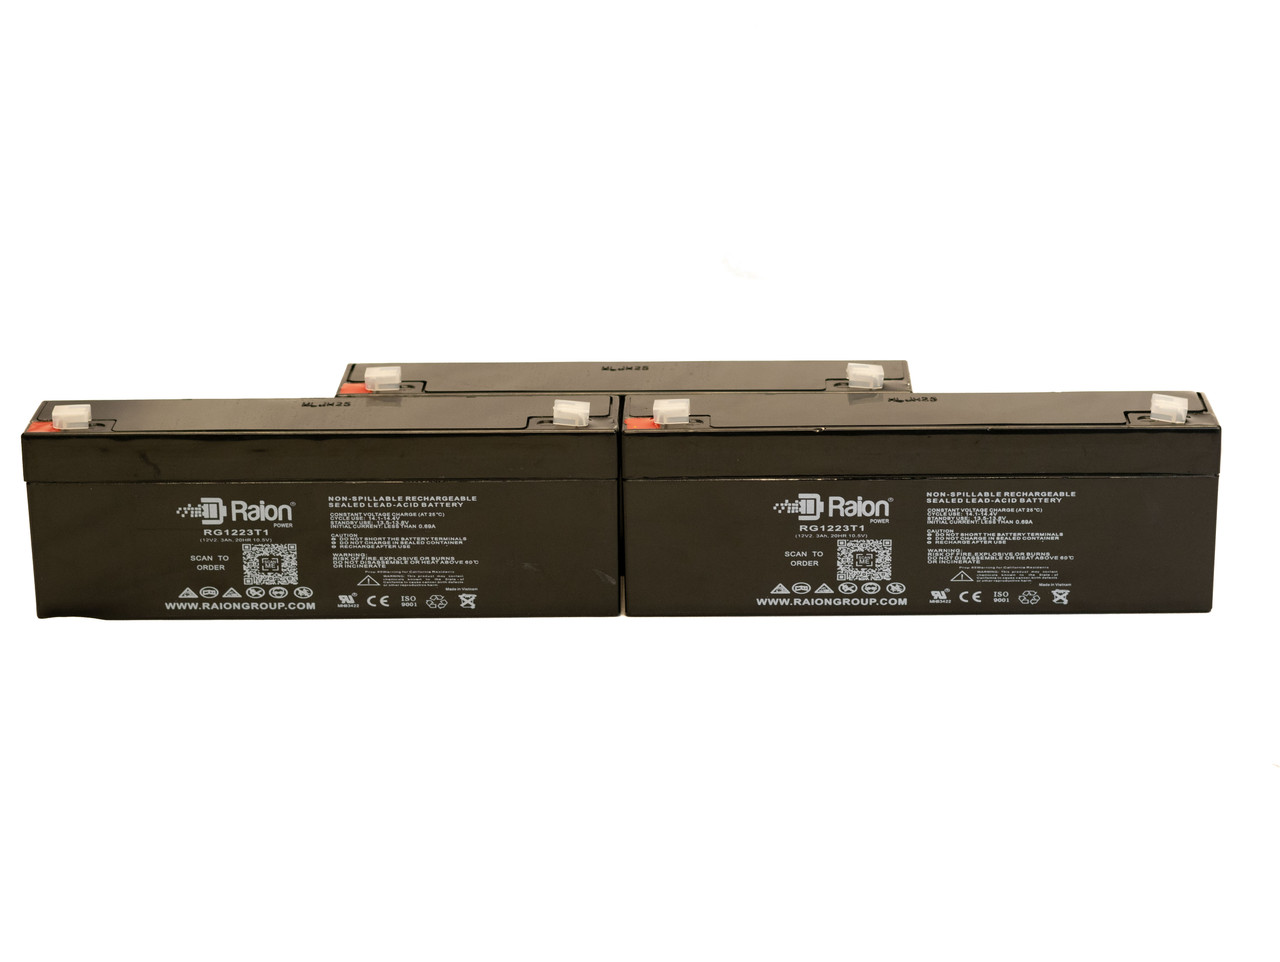 Raion Power 12V 2.3Ah RG1223T1 Replacement Medical Battery for In-Vivo Research 4500 - 3 Pack